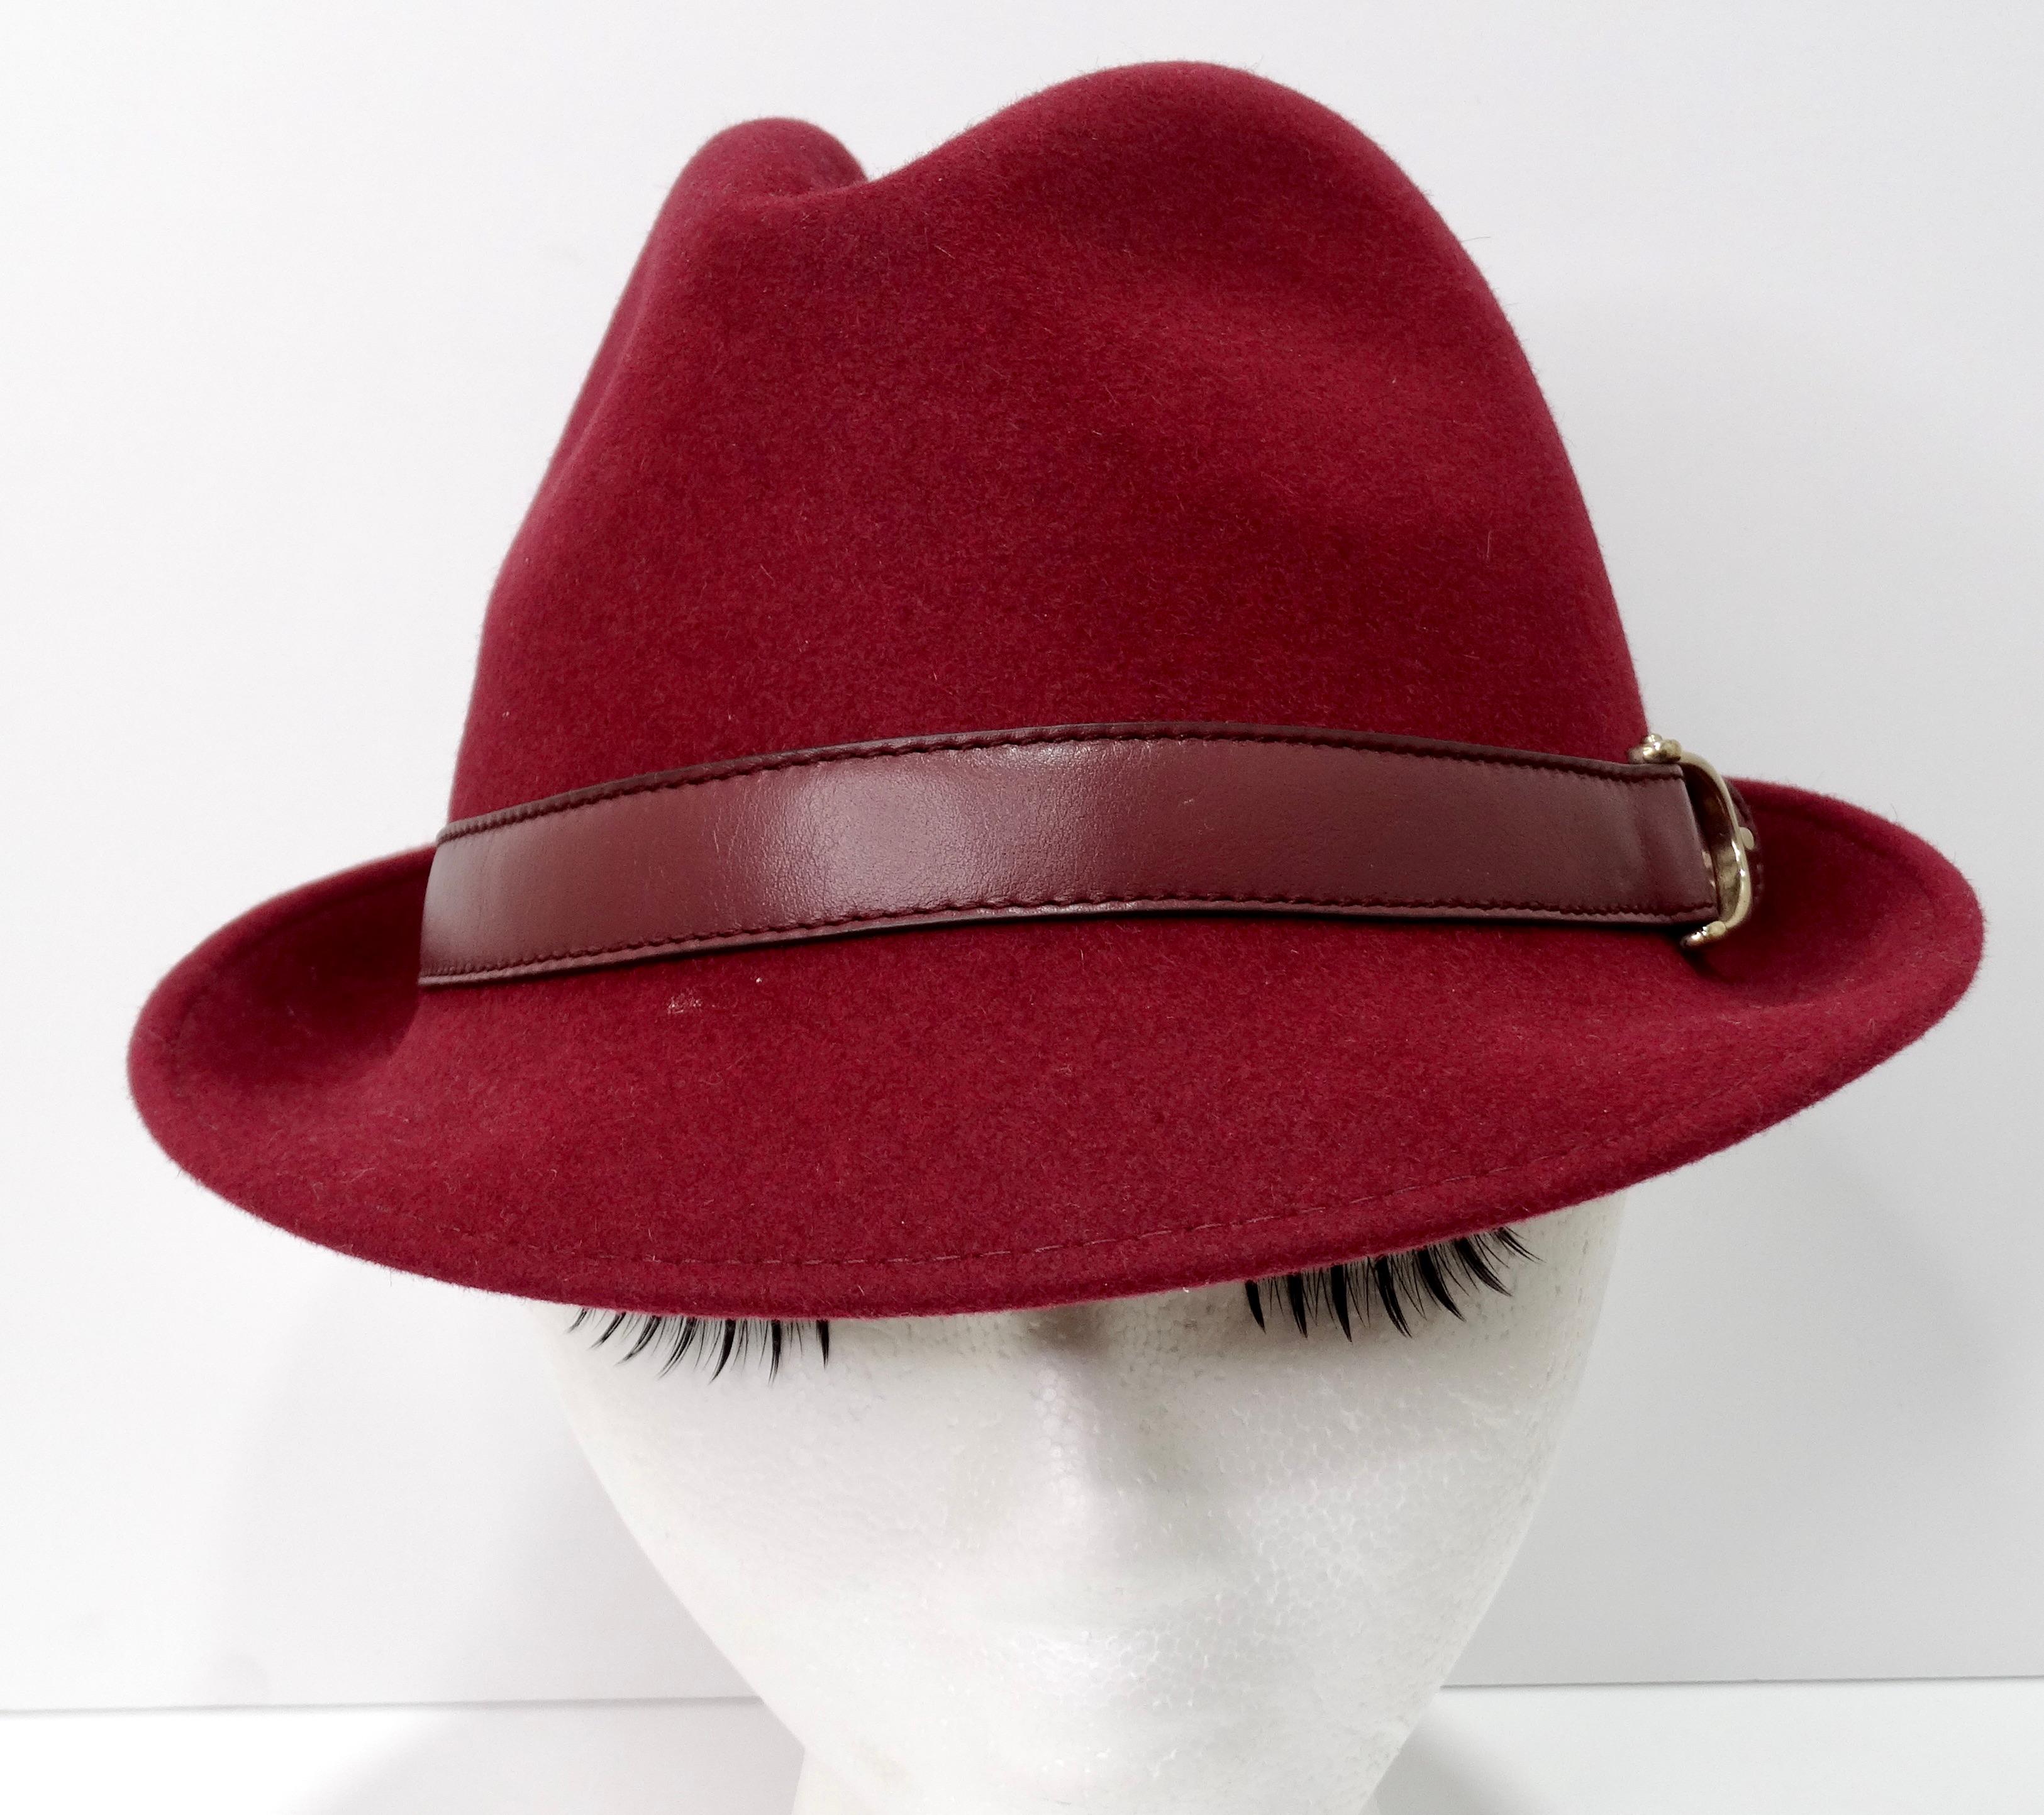 An early 2000's gem you can't pass up! A Gucci fedora is a no-brainer to add to your wardrobe. This is a beautiful burgundy rabbit fur fedora-style hat featuring a burgundy leather strap with a gold buckle adorning the side. It would look great with